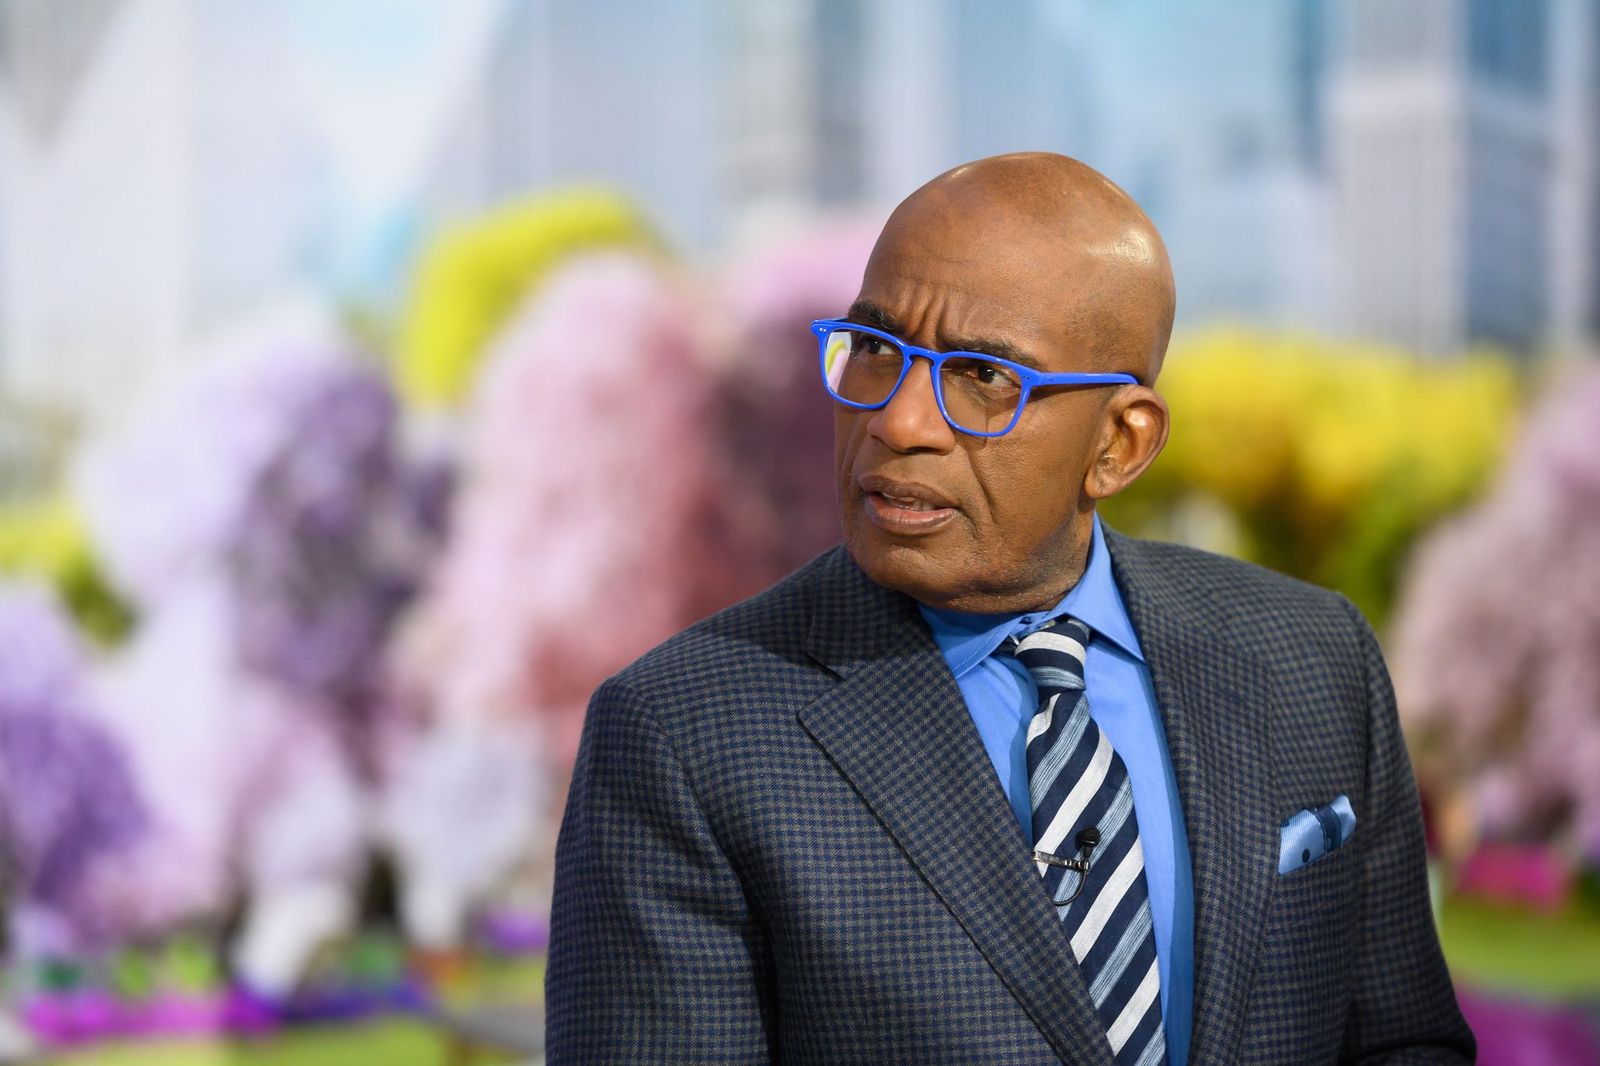 Al Roker on the "Today" show on March 27, 2019 | Photo: Nathan Congleton/NBCU Photo Bank/NBCUniversal/Getty Images 